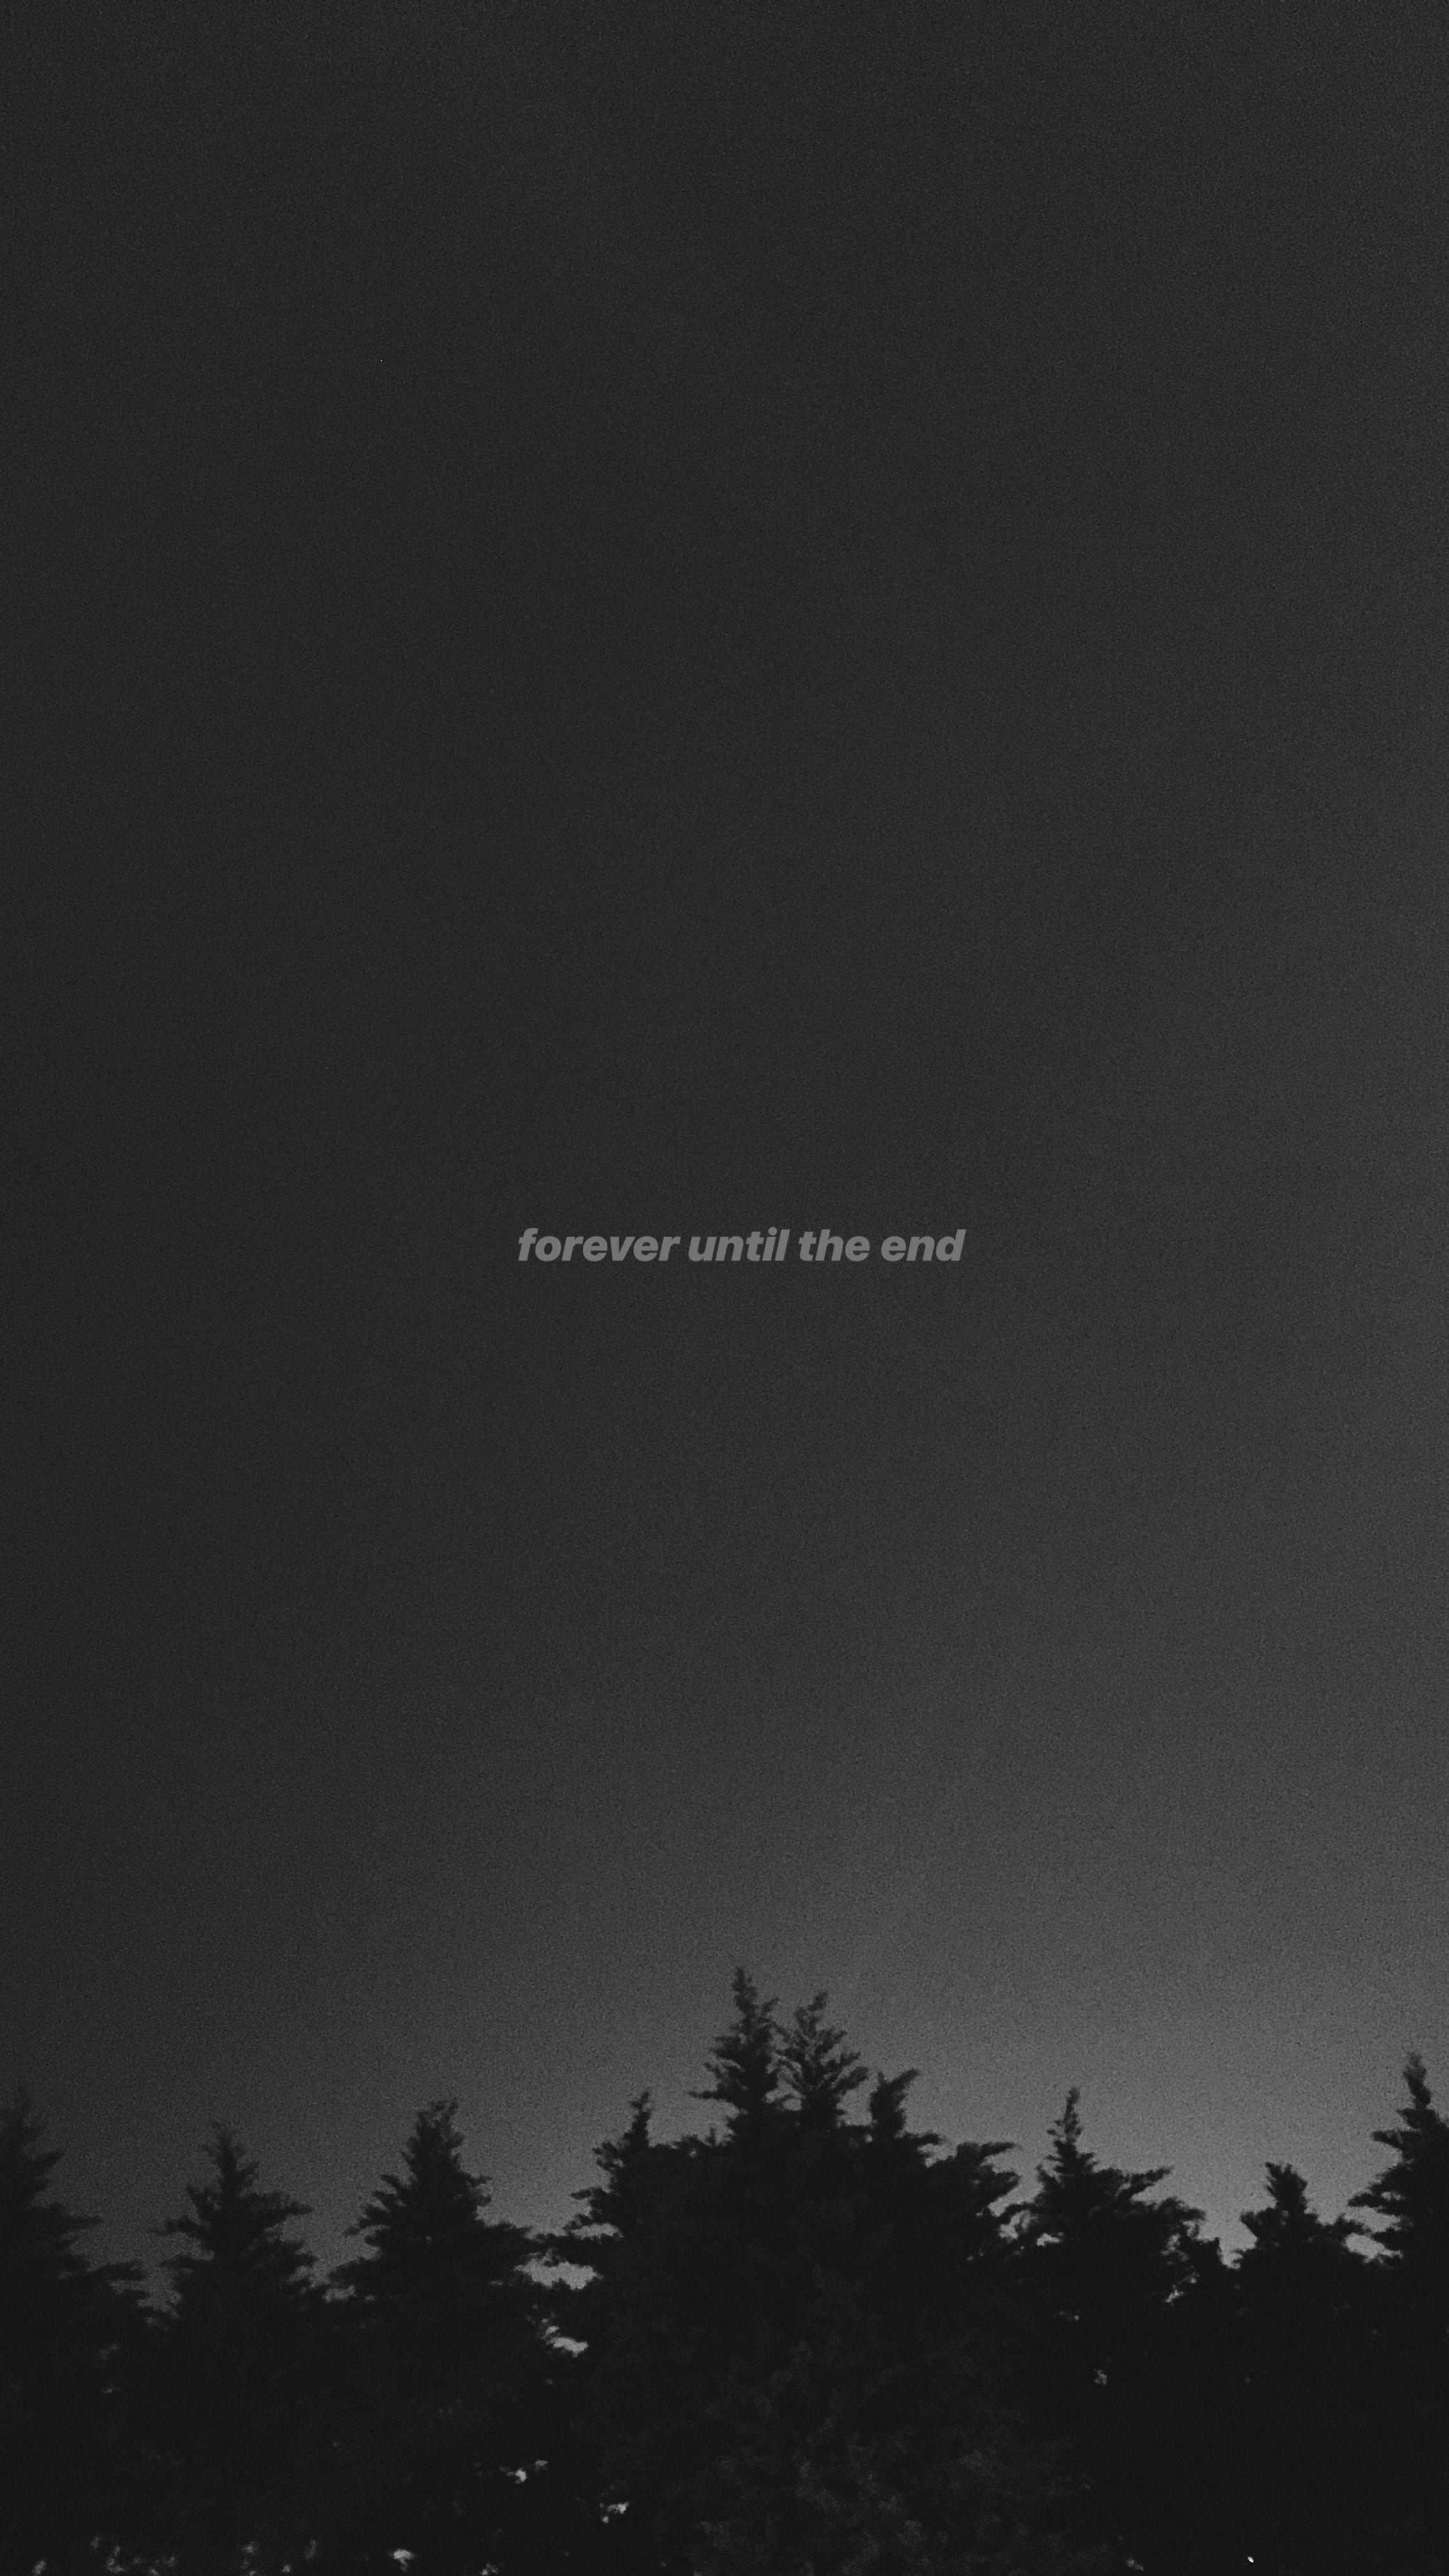 Aesthetic Sad Quotes Wallpapers